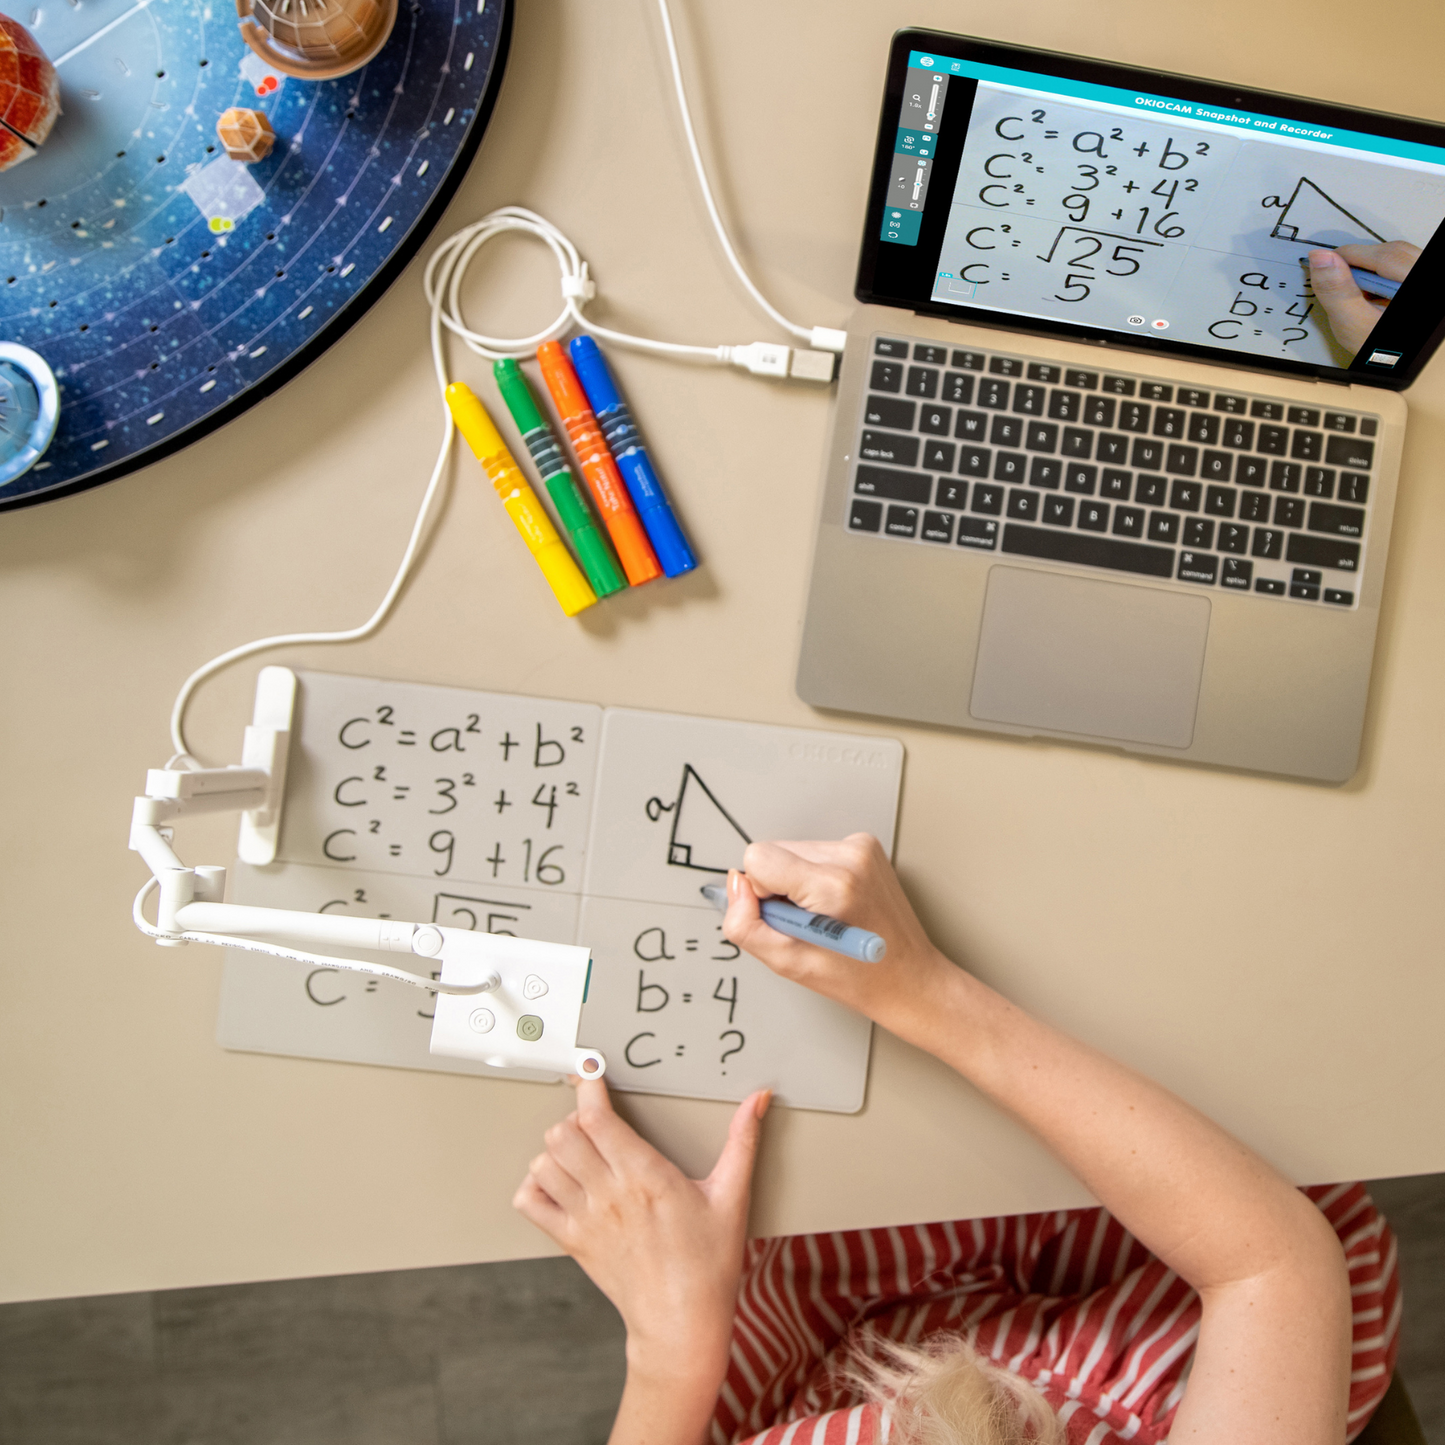 OKIOCAM T Plus 5MP USB Document Camera with Dry-erase board and Marker